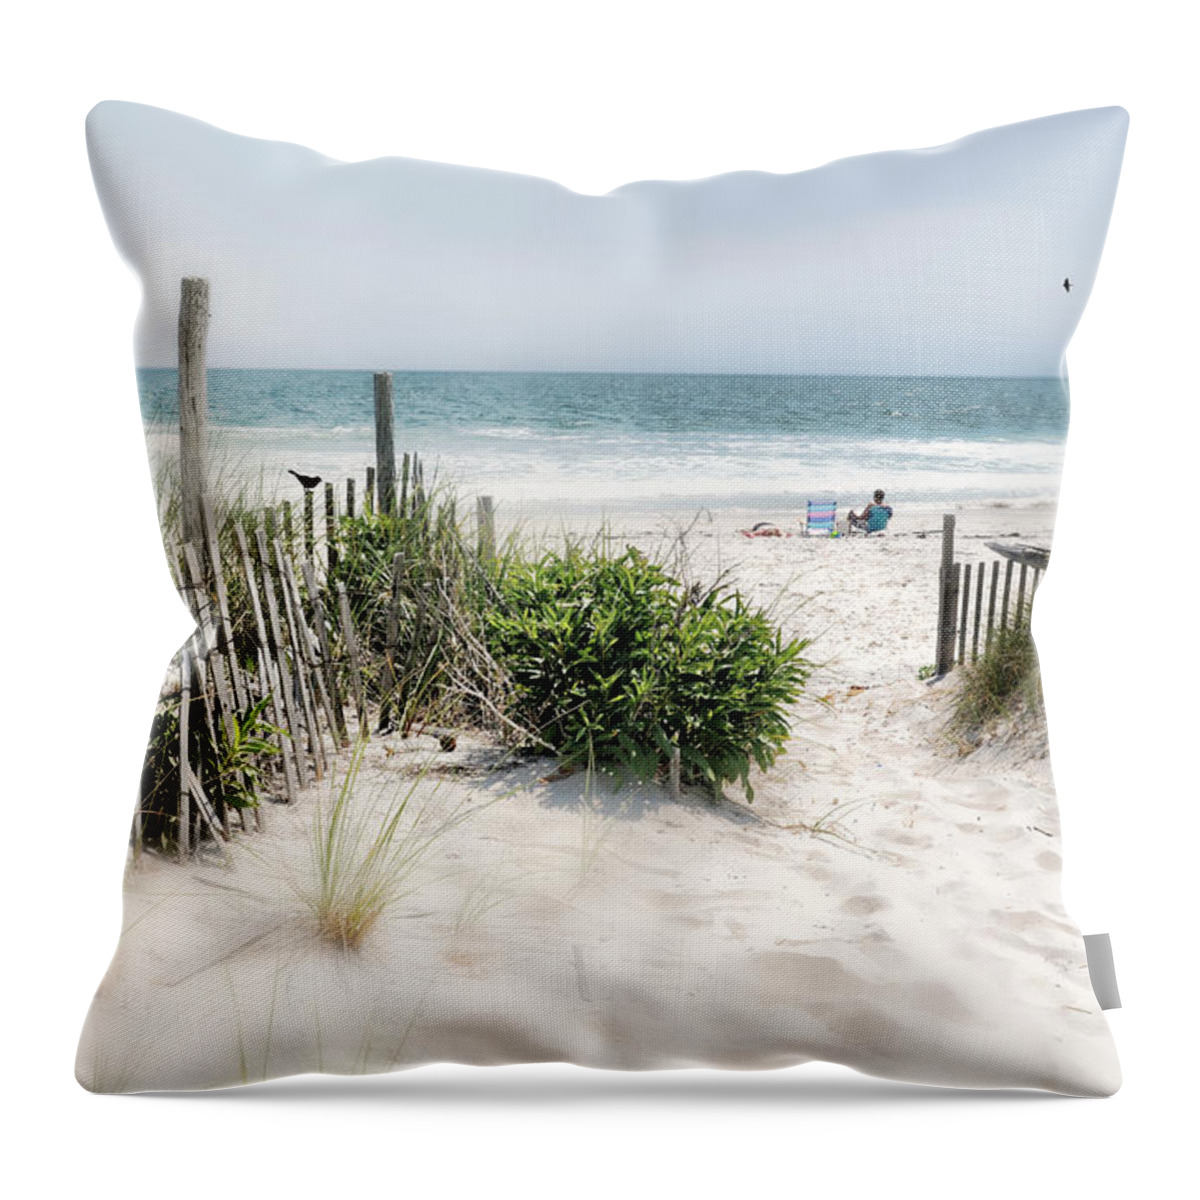 Ocean Throw Pillow featuring the photograph A Summer Place by Diana Angstadt